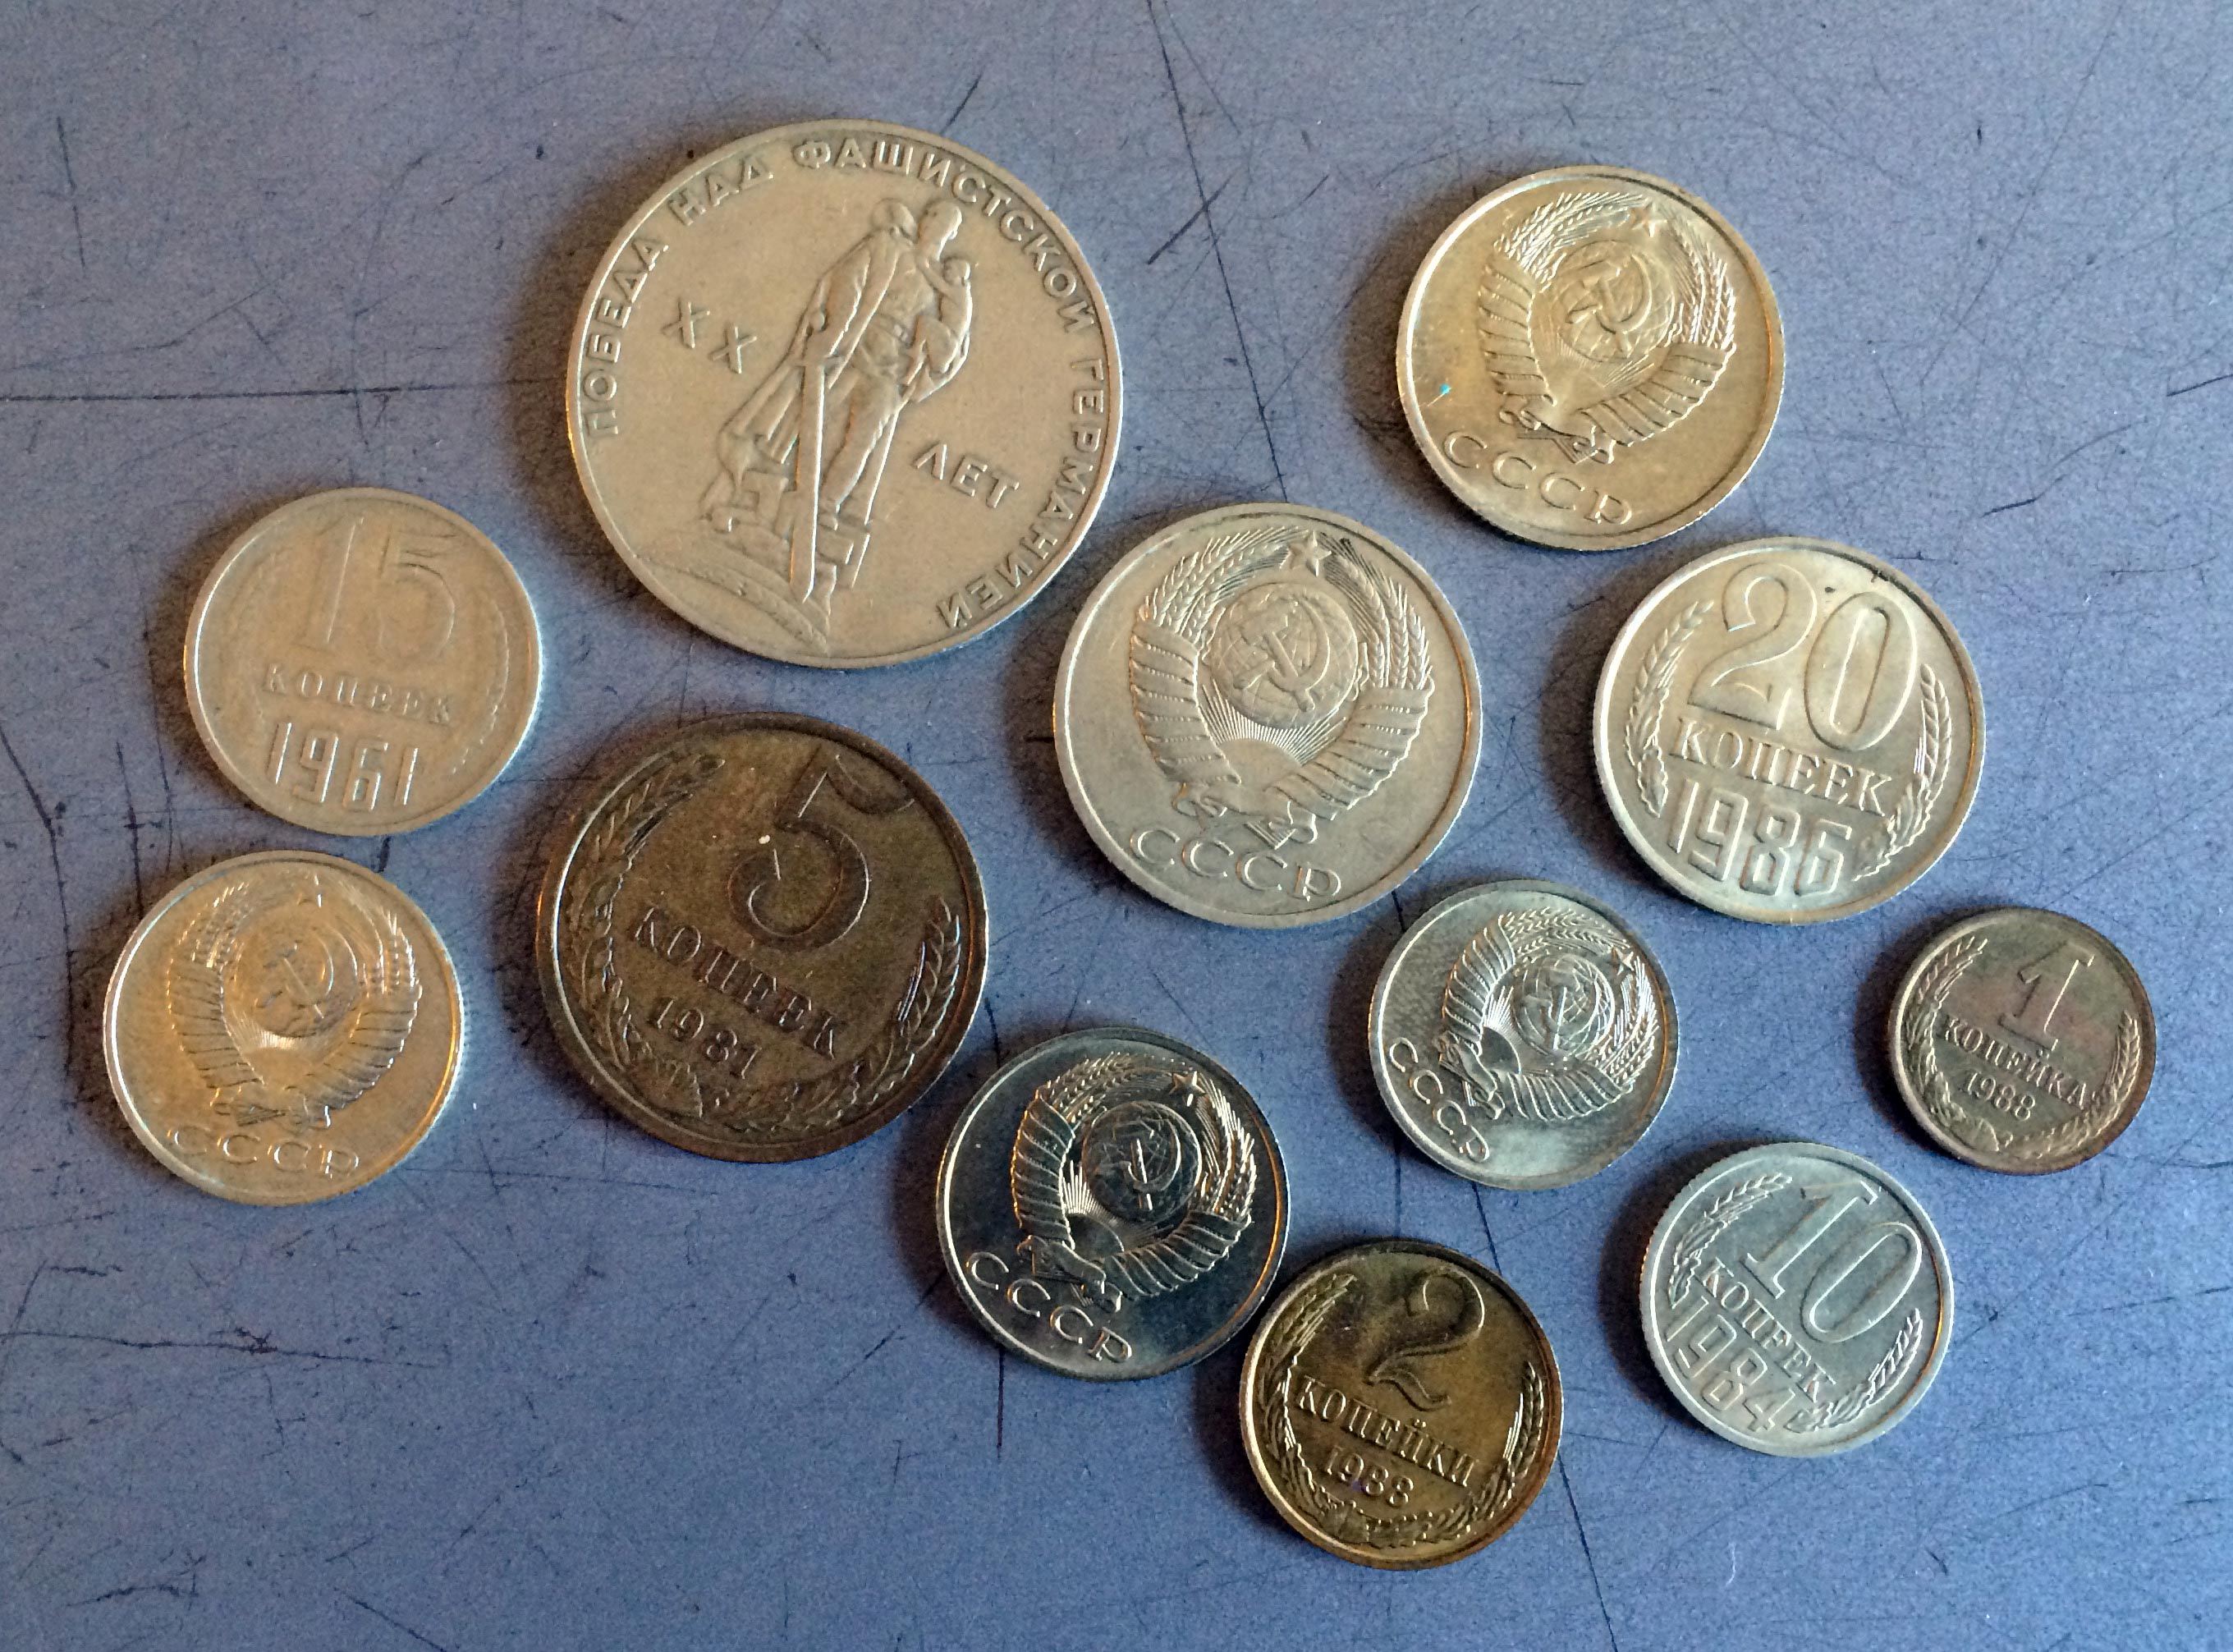 USSR coins